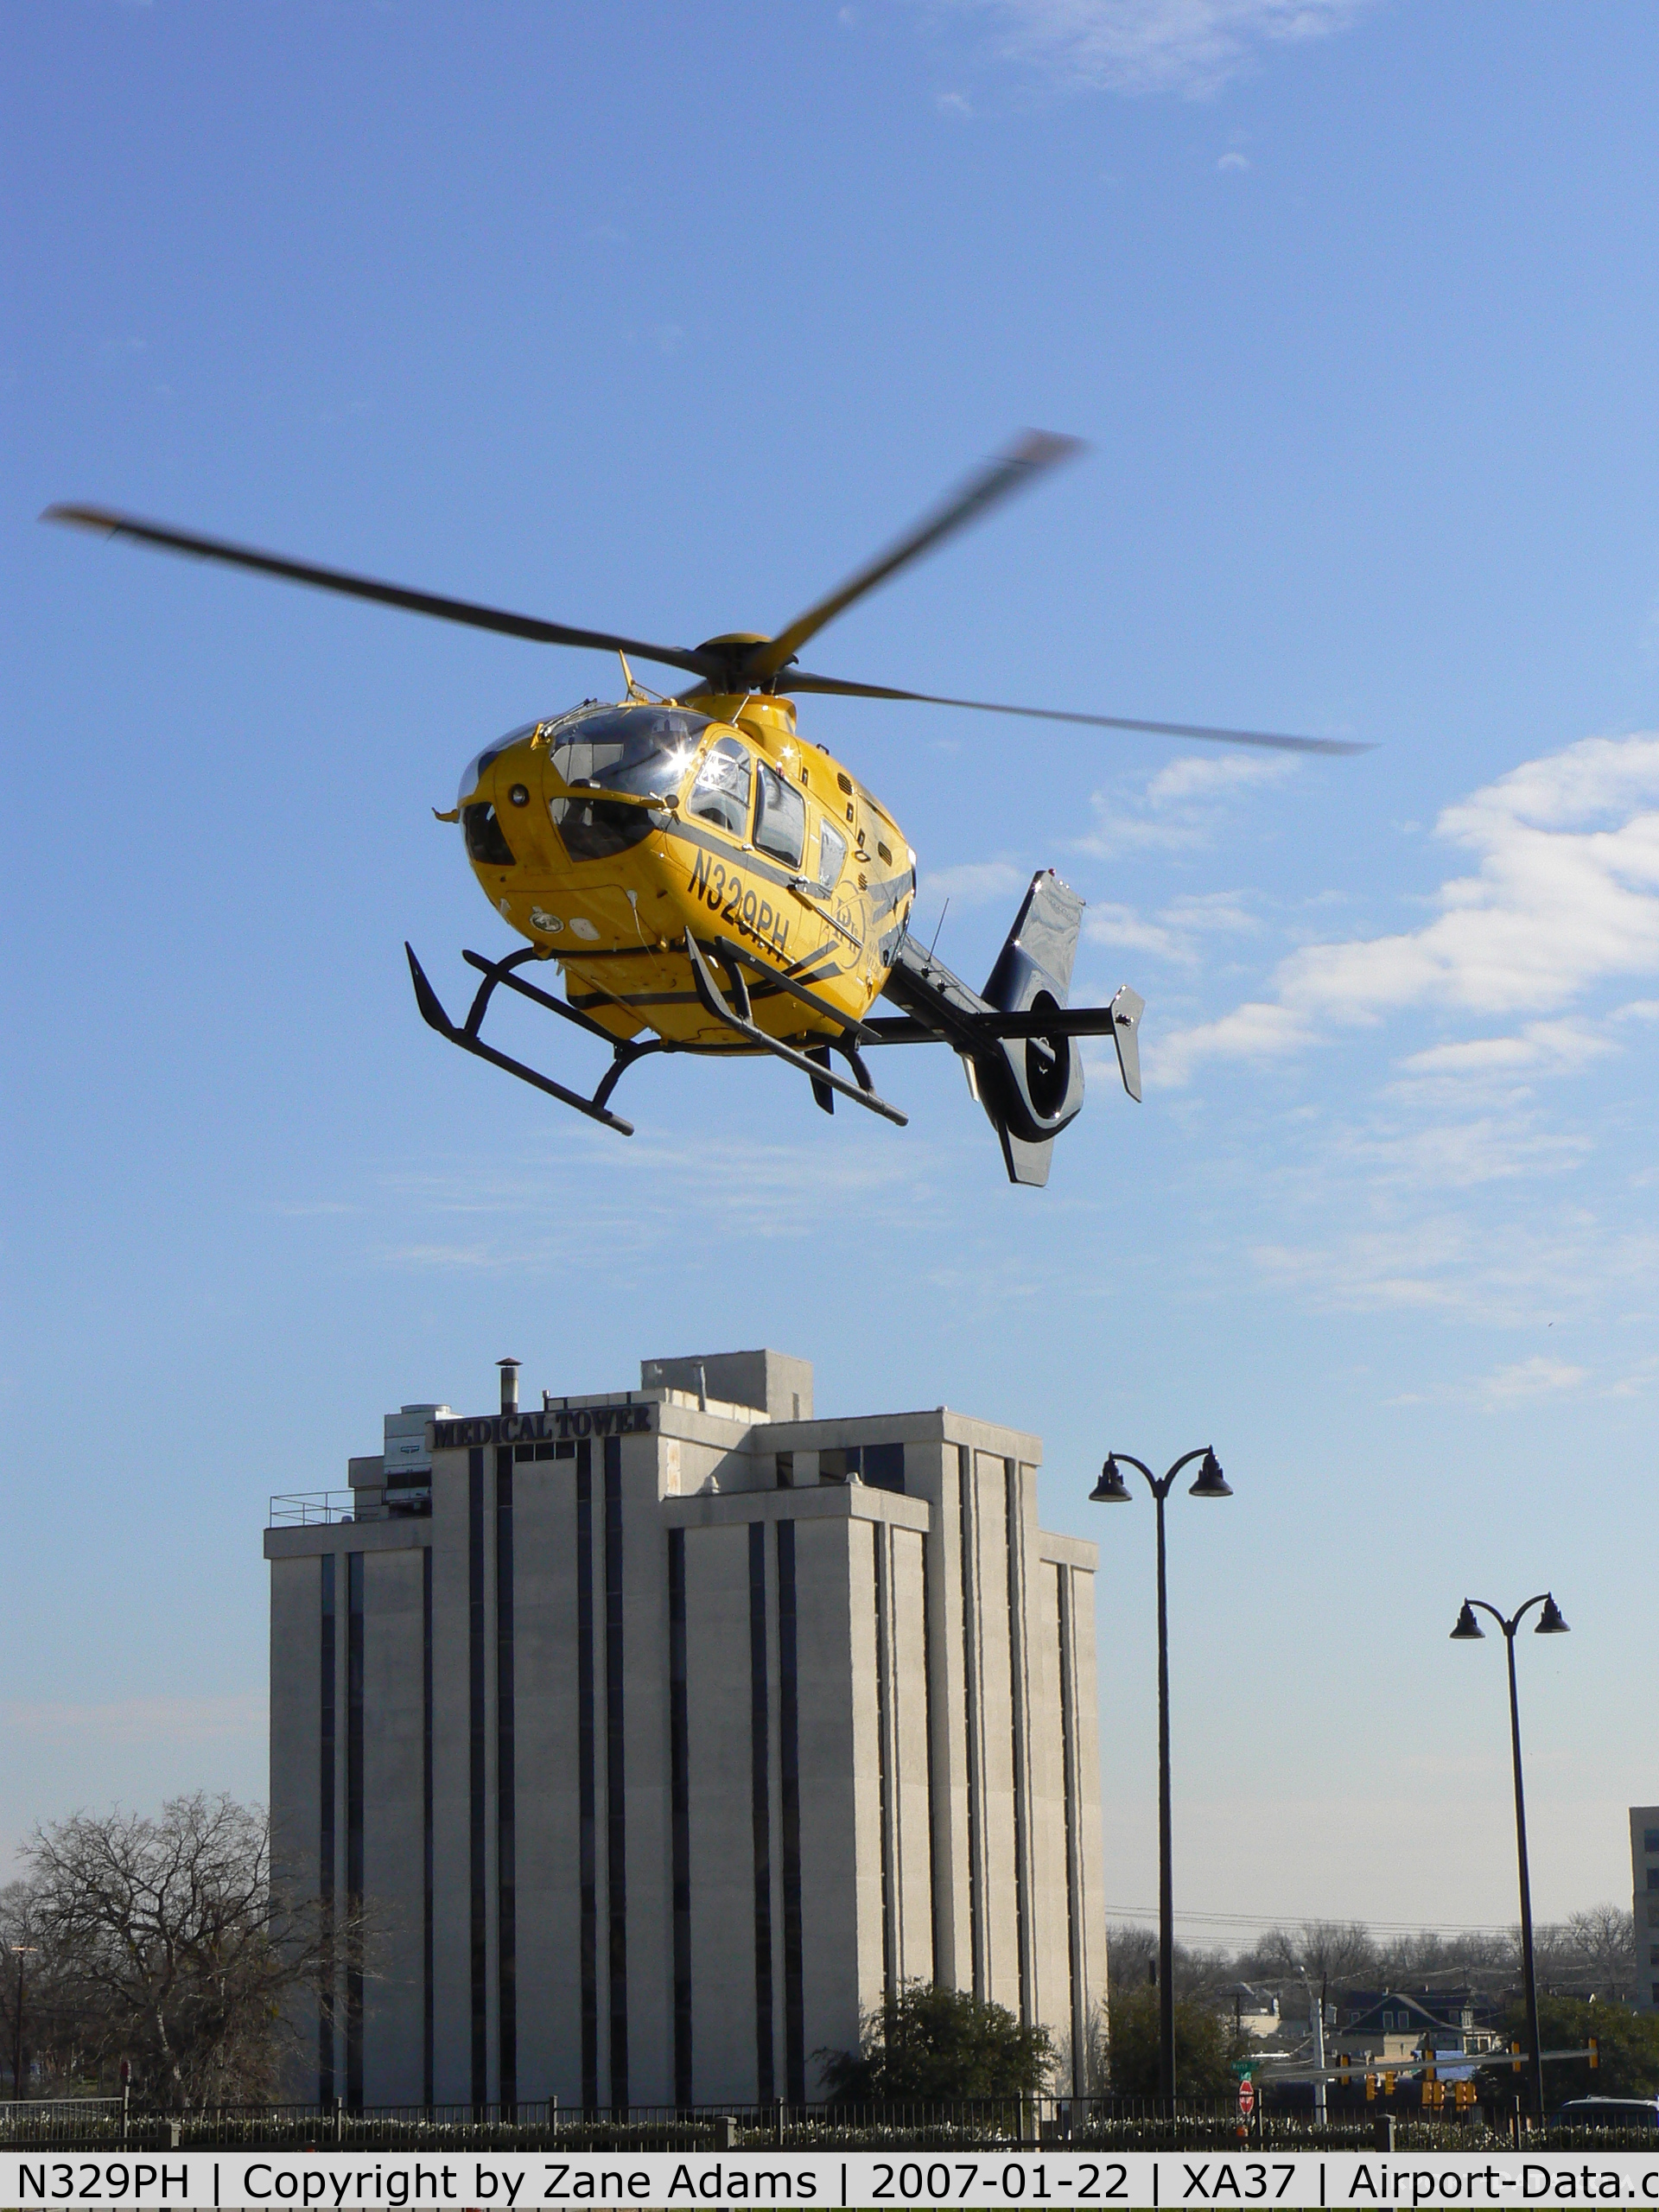 N329PH, 2006 Eurocopter EC-135P-2 C/N 0489, Leaving hospital pad in the medical district @ Ft. Worth, TX